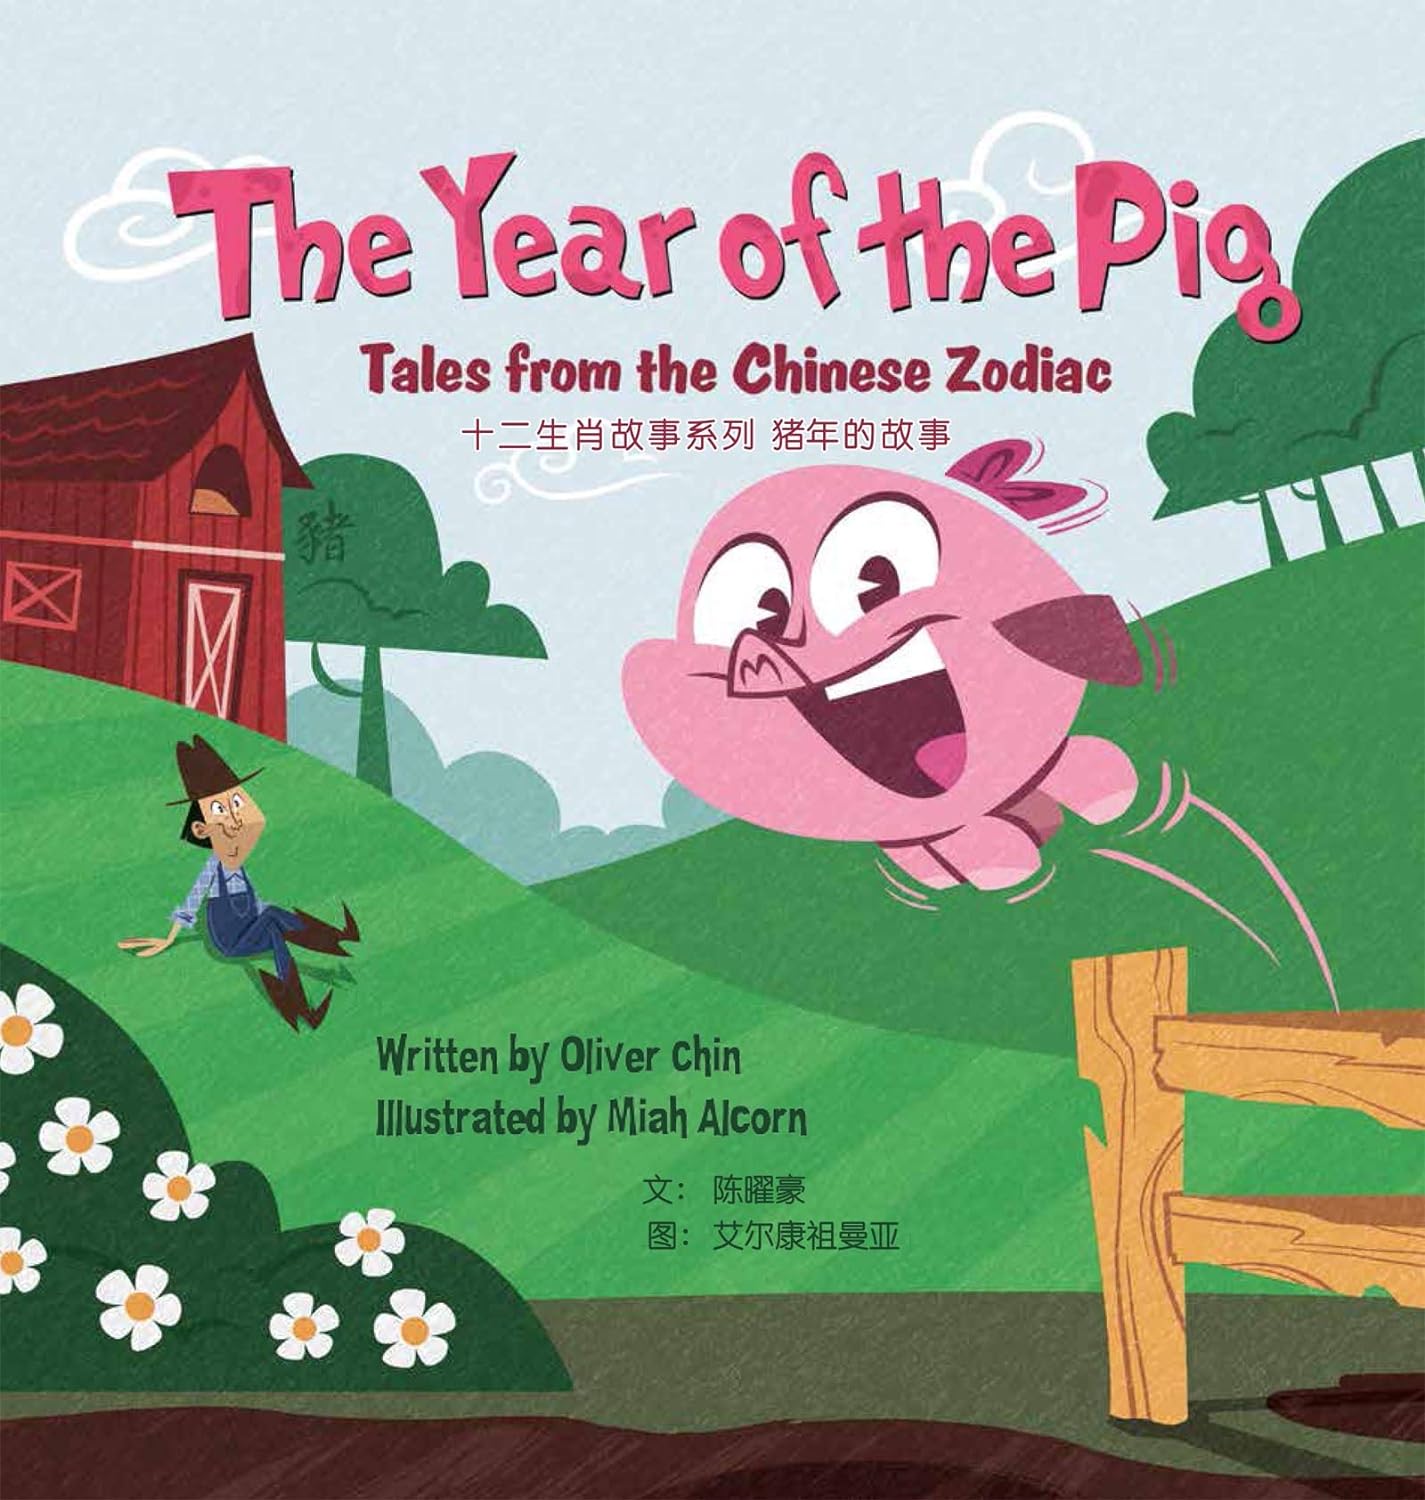 The Year of the Pig: Tales from the Chinese Zodiac